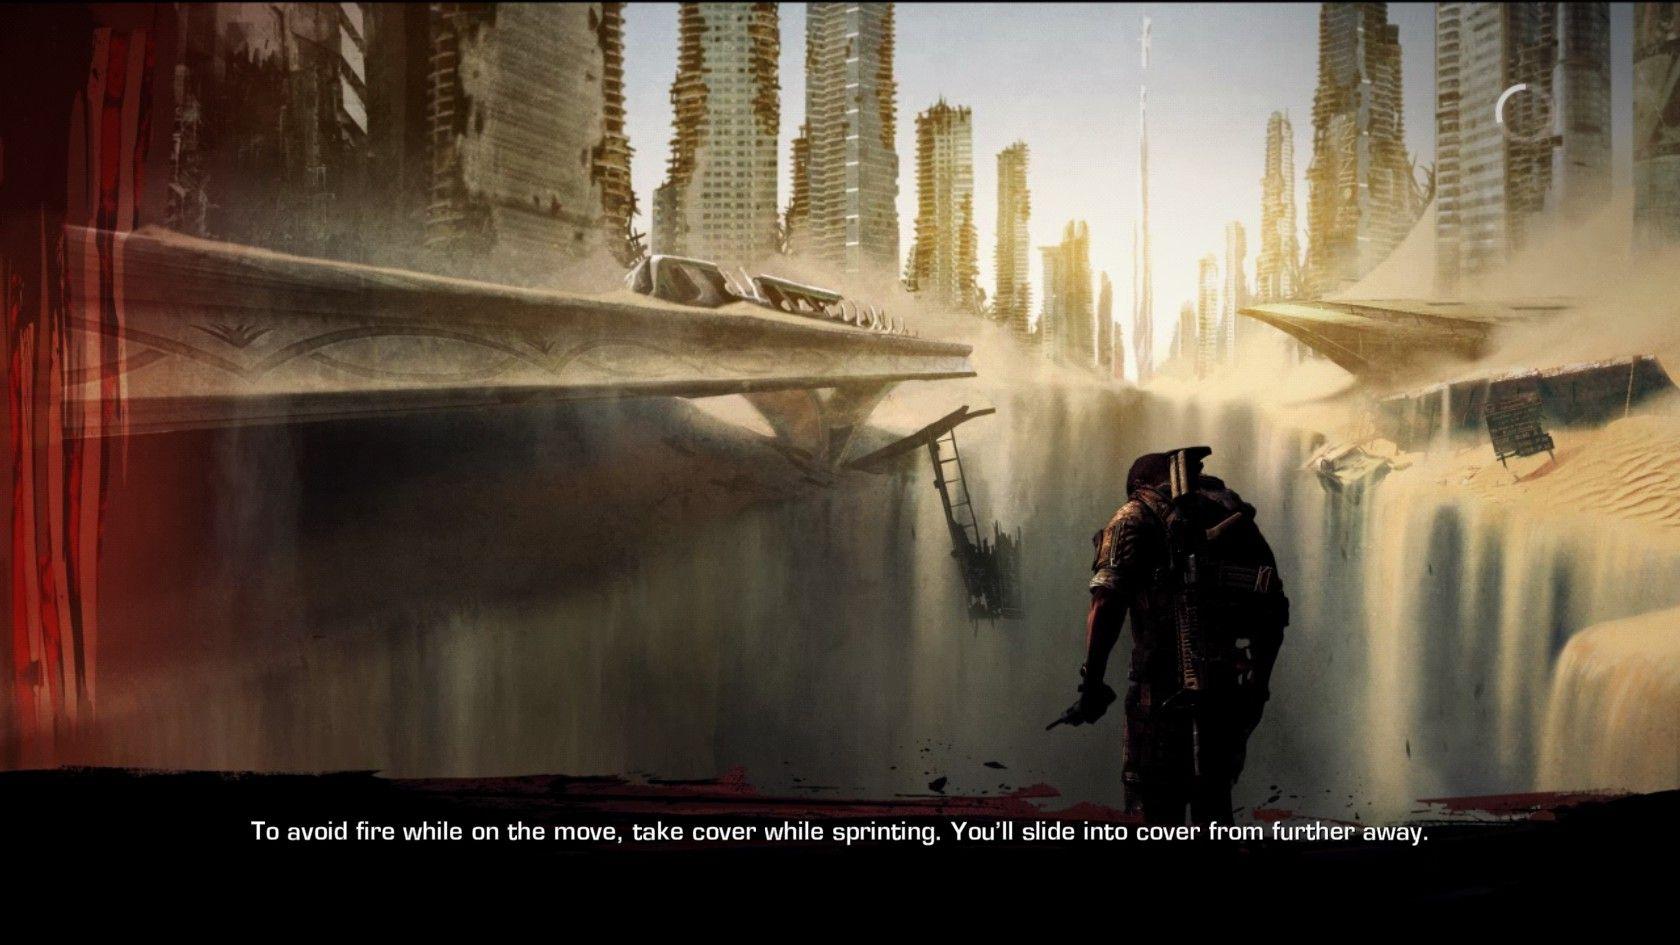 spec ops the line loading screen text